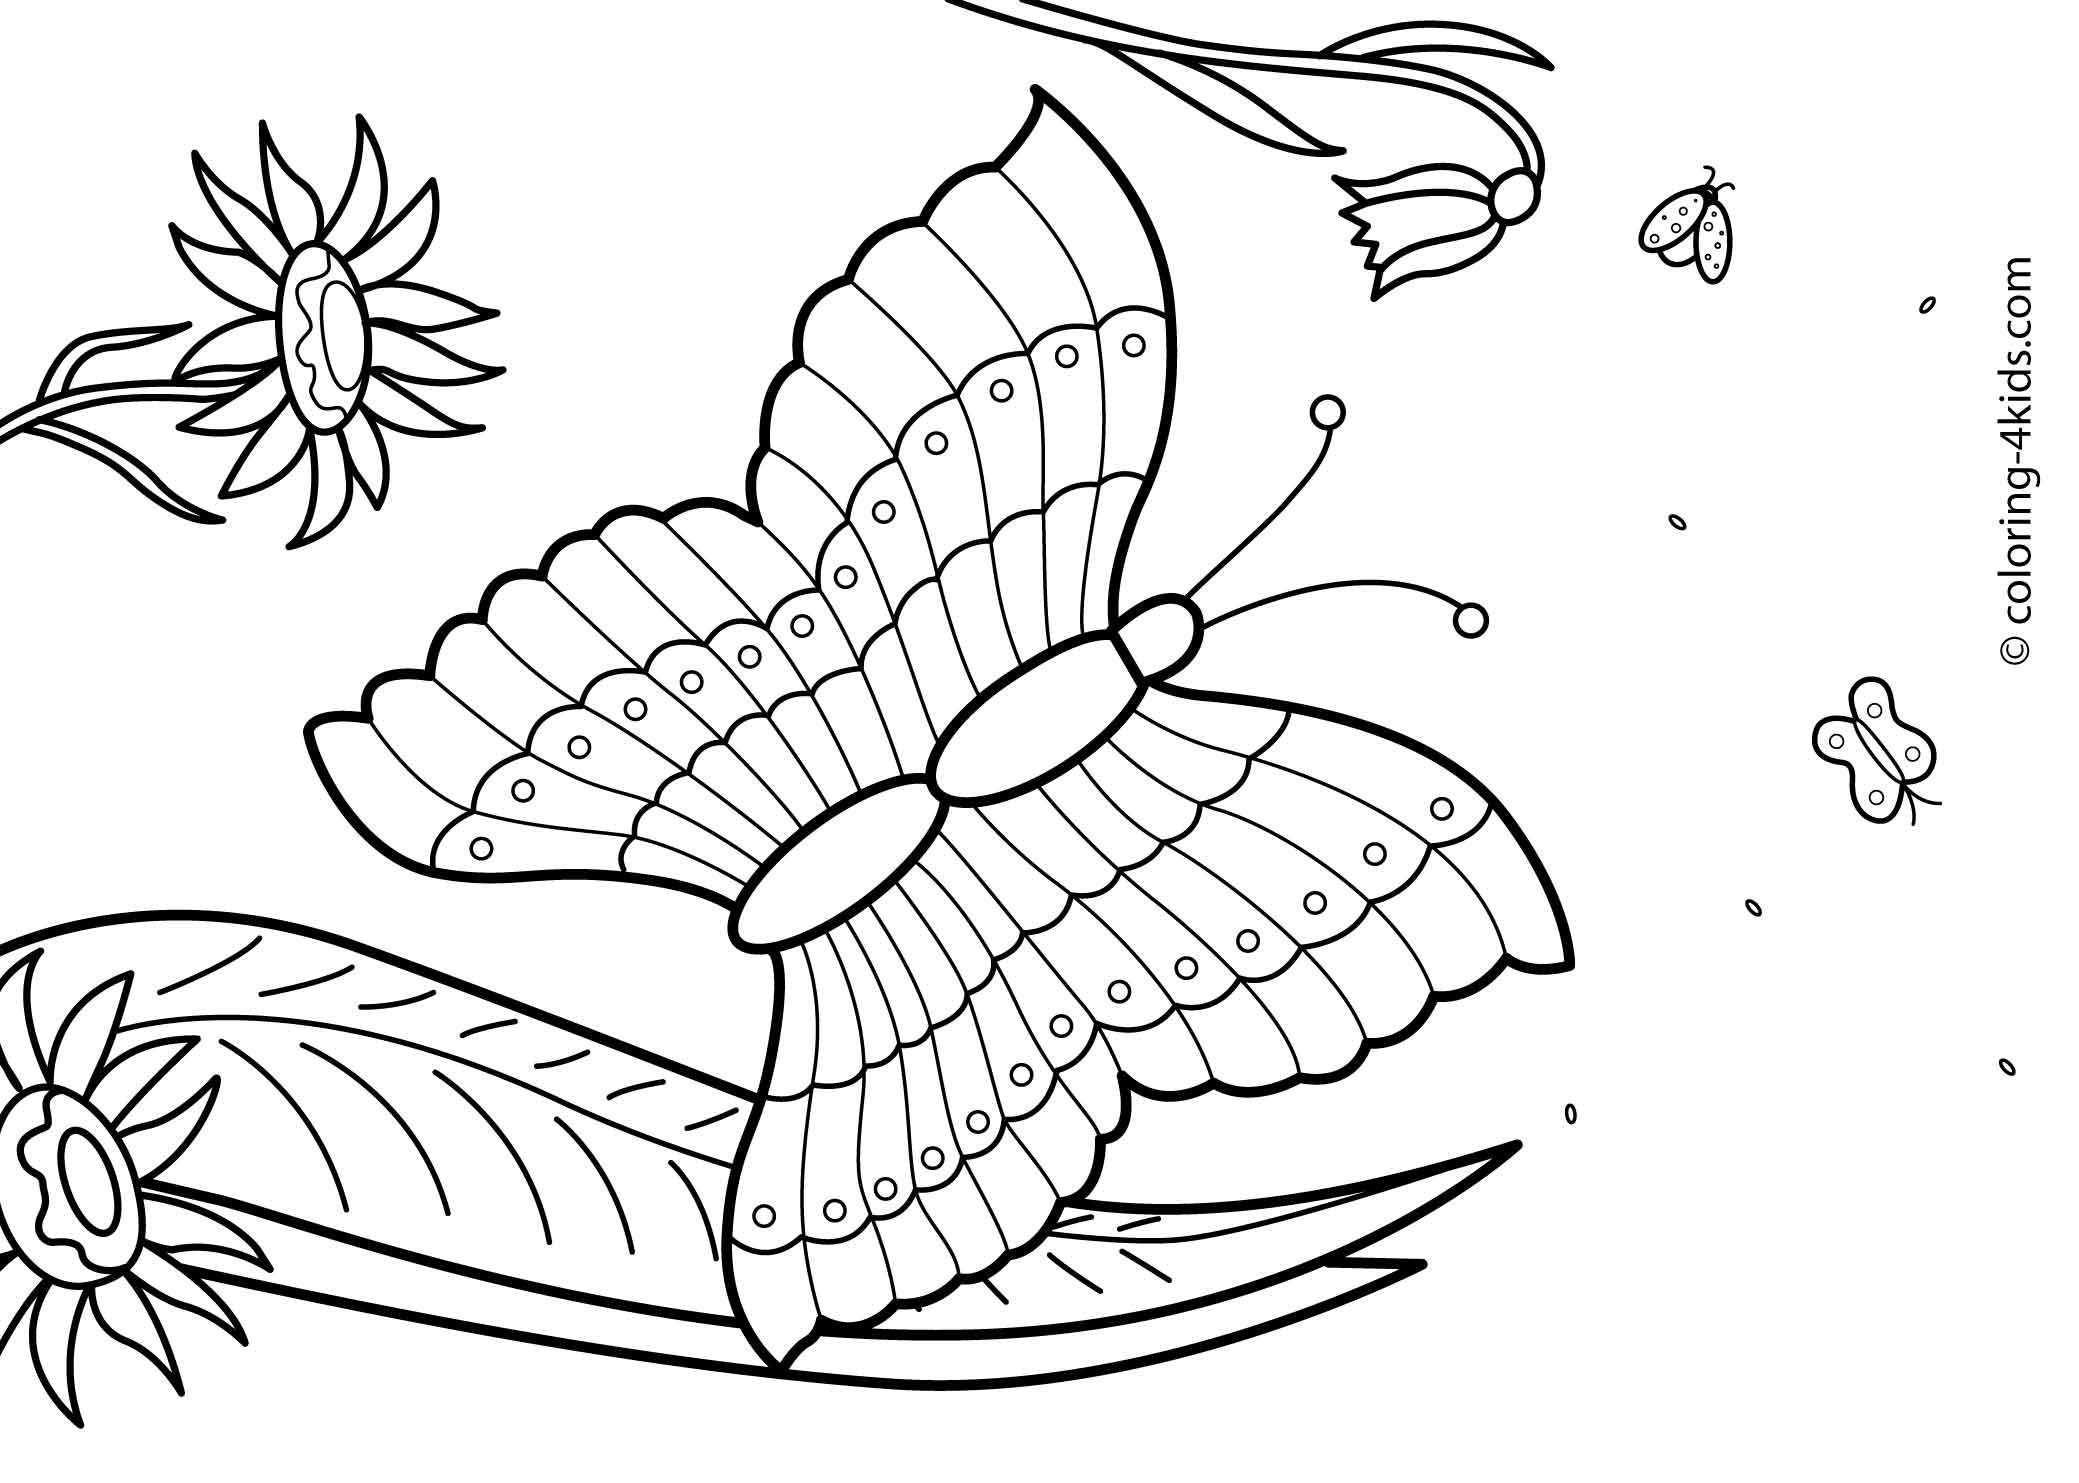 Summer Coloring Pages For Toddlers
 27 Summer season coloring pages part 2